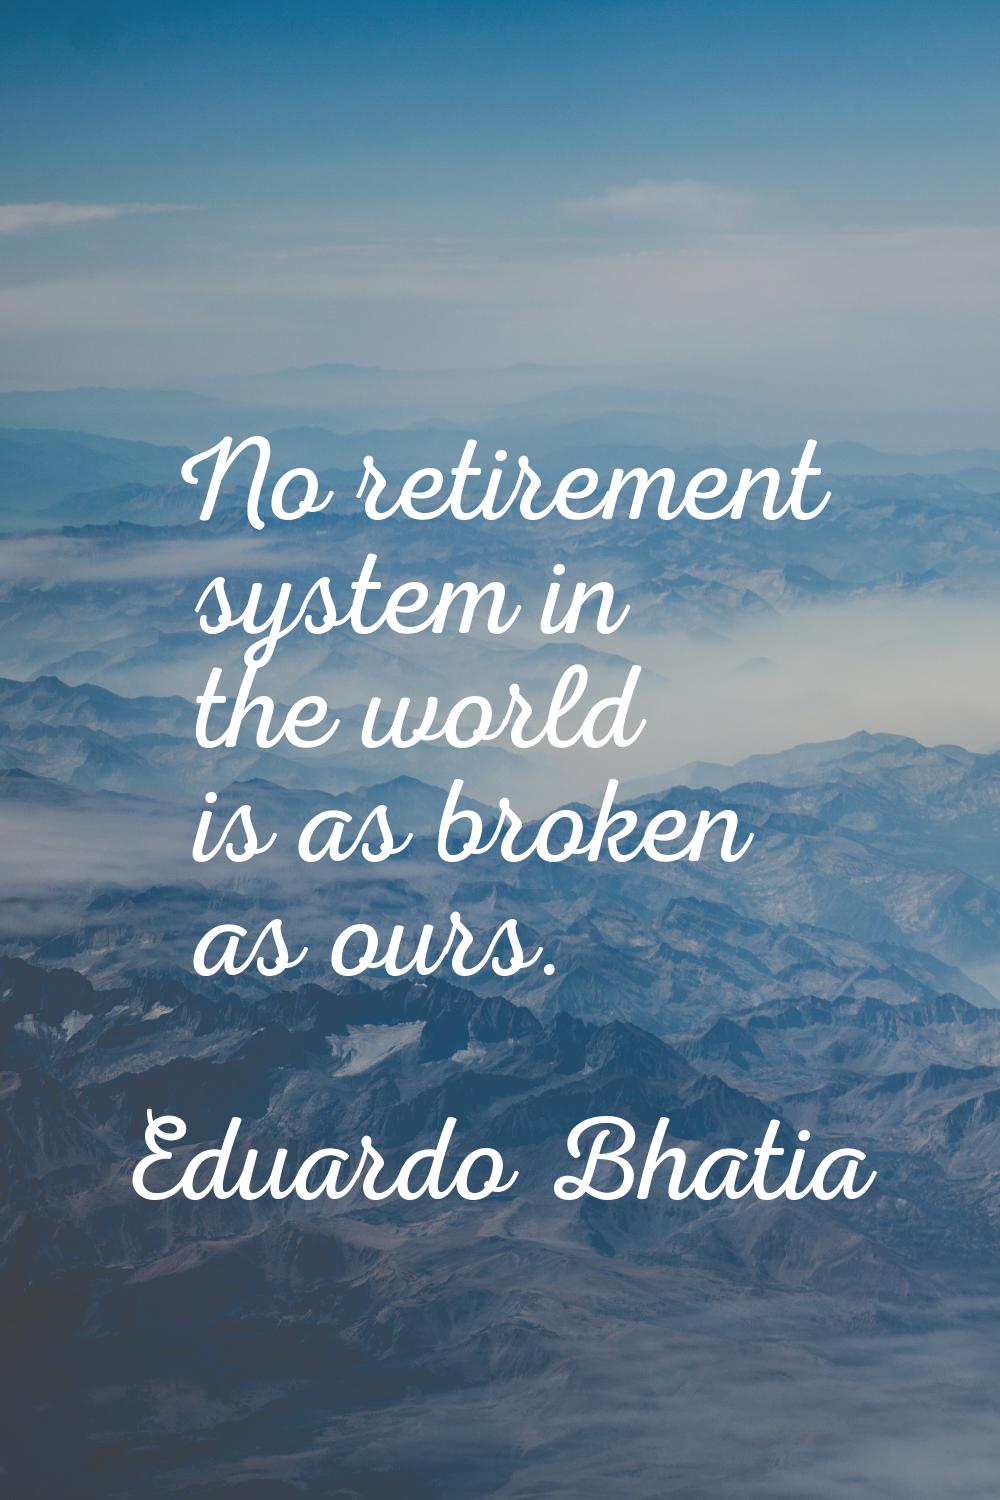 No retirement system in the world is as broken as ours.